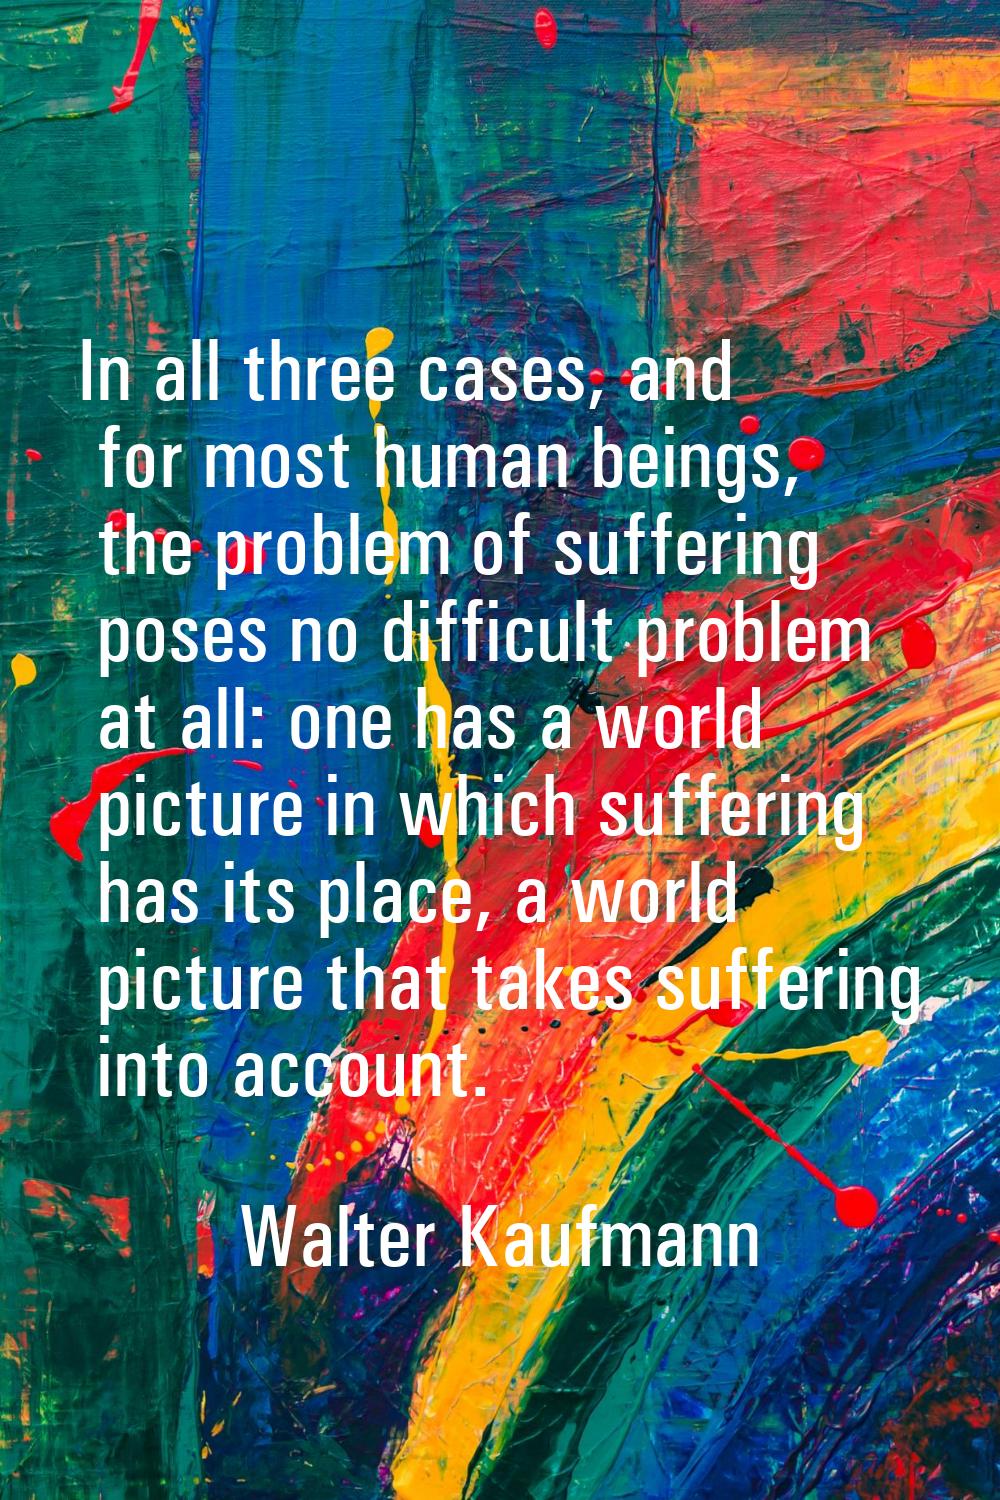 In all three cases, and for most human beings, the problem of suffering poses no difficult problem 